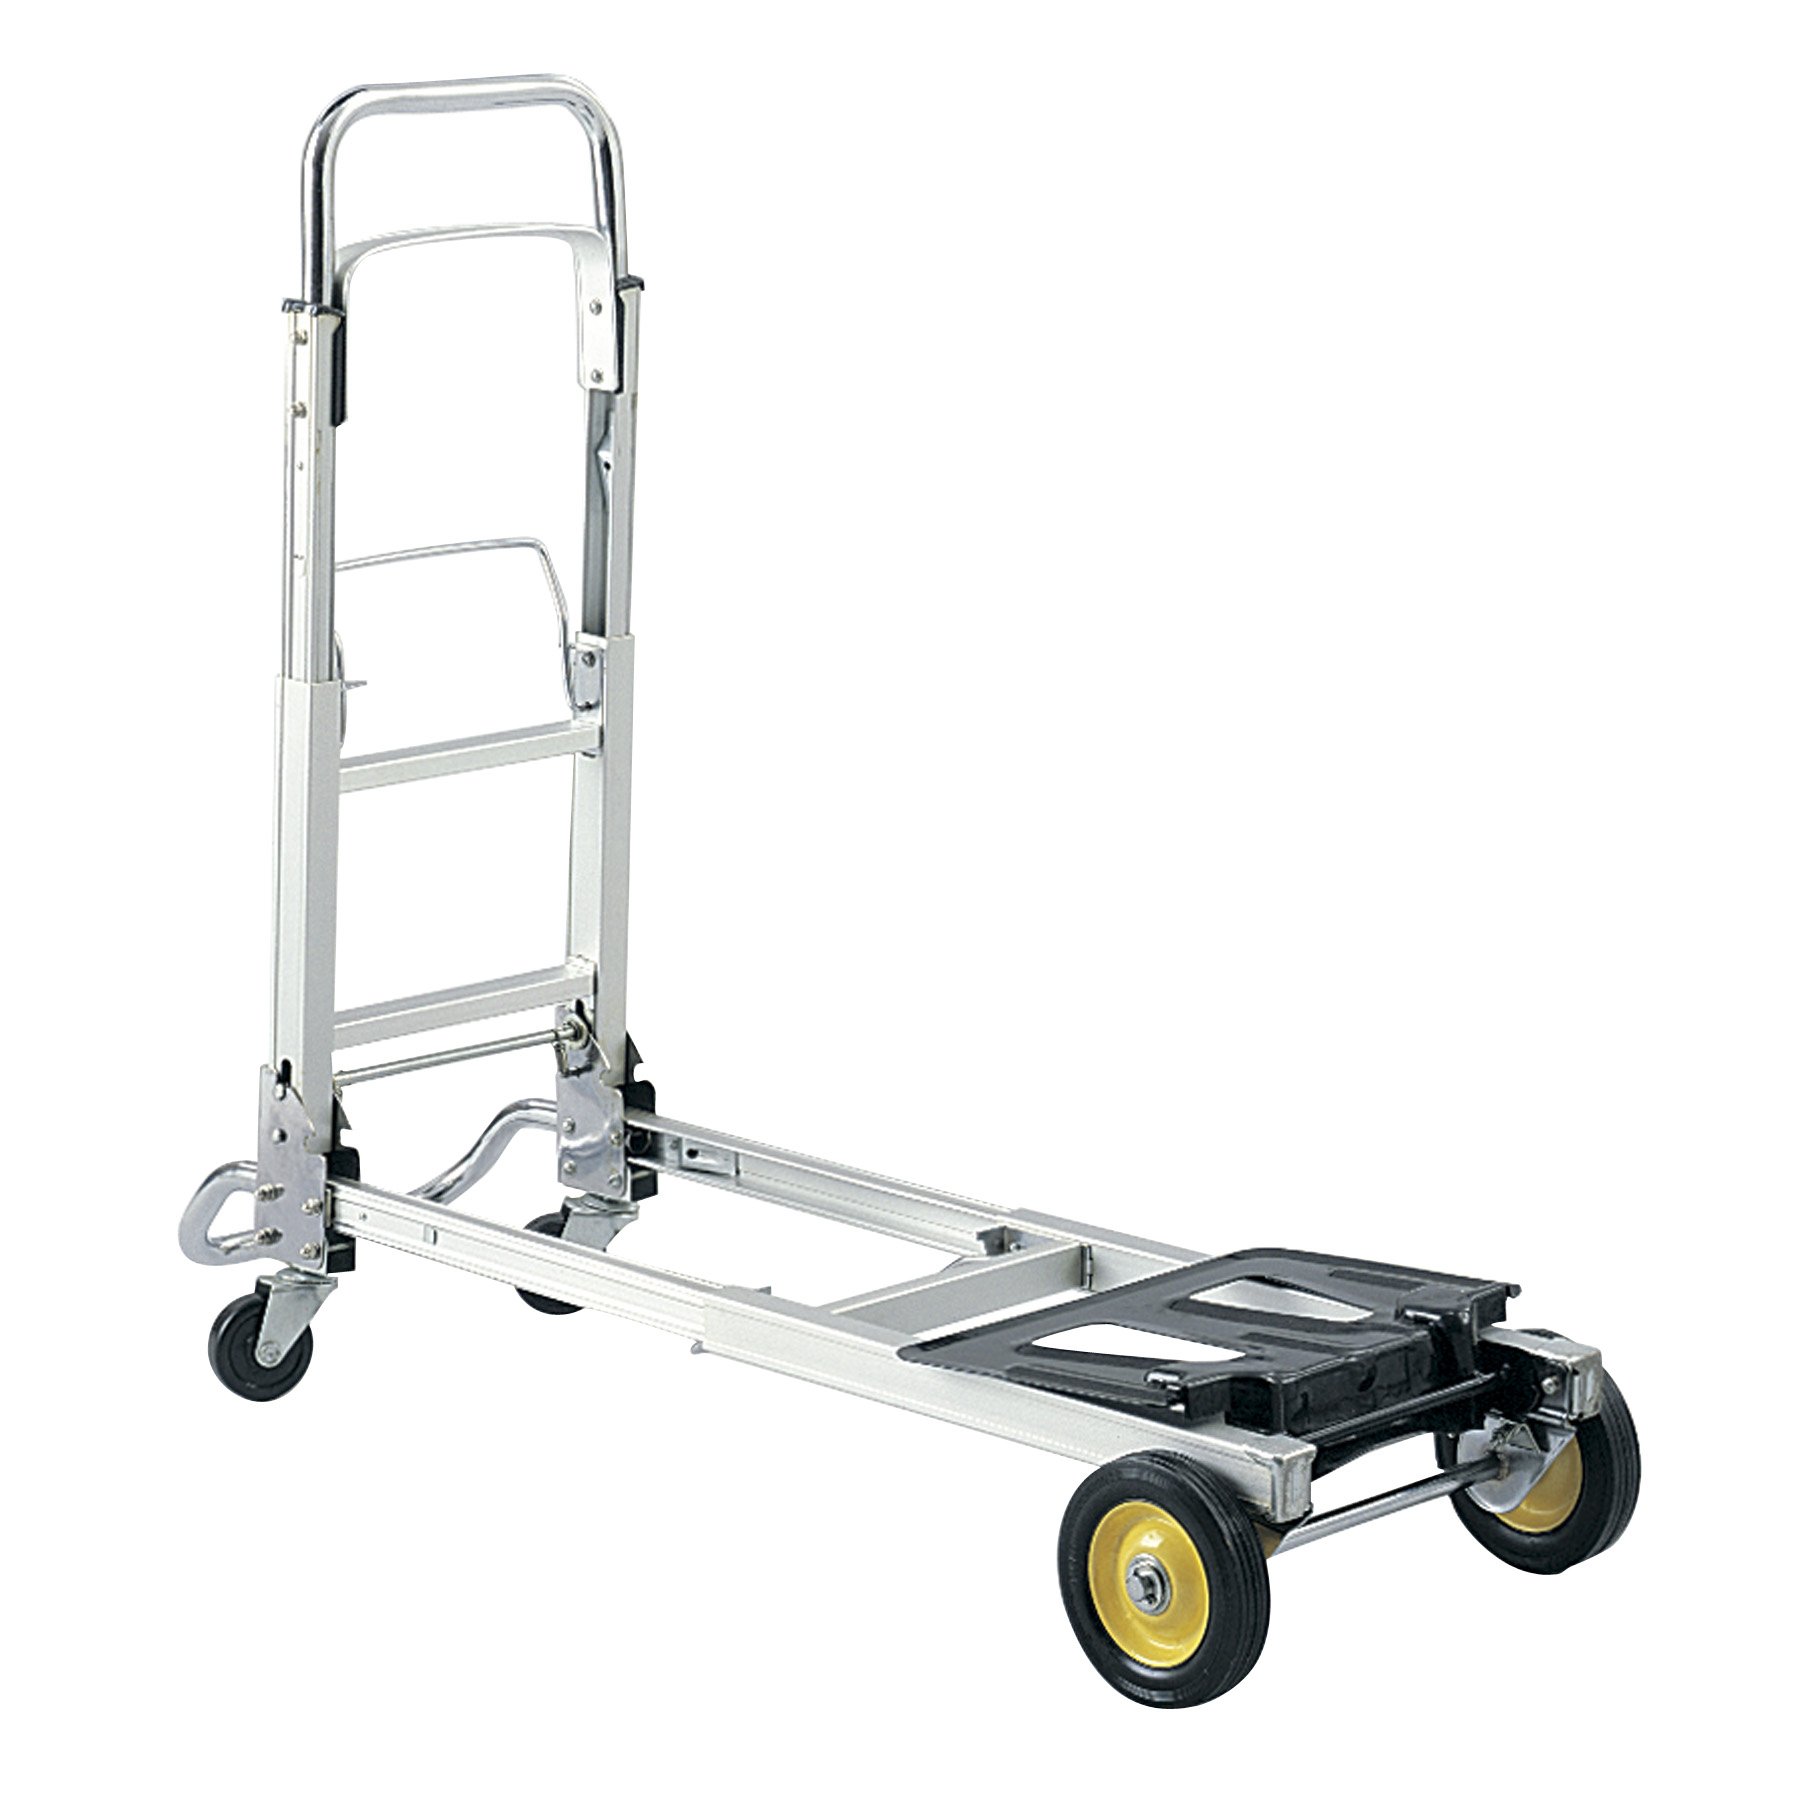 400-Lb Capacity Safco Products Hide-Away Convertible Hand Truck Dolly w/ Aluminum Frame $95.45 + Free Shipping